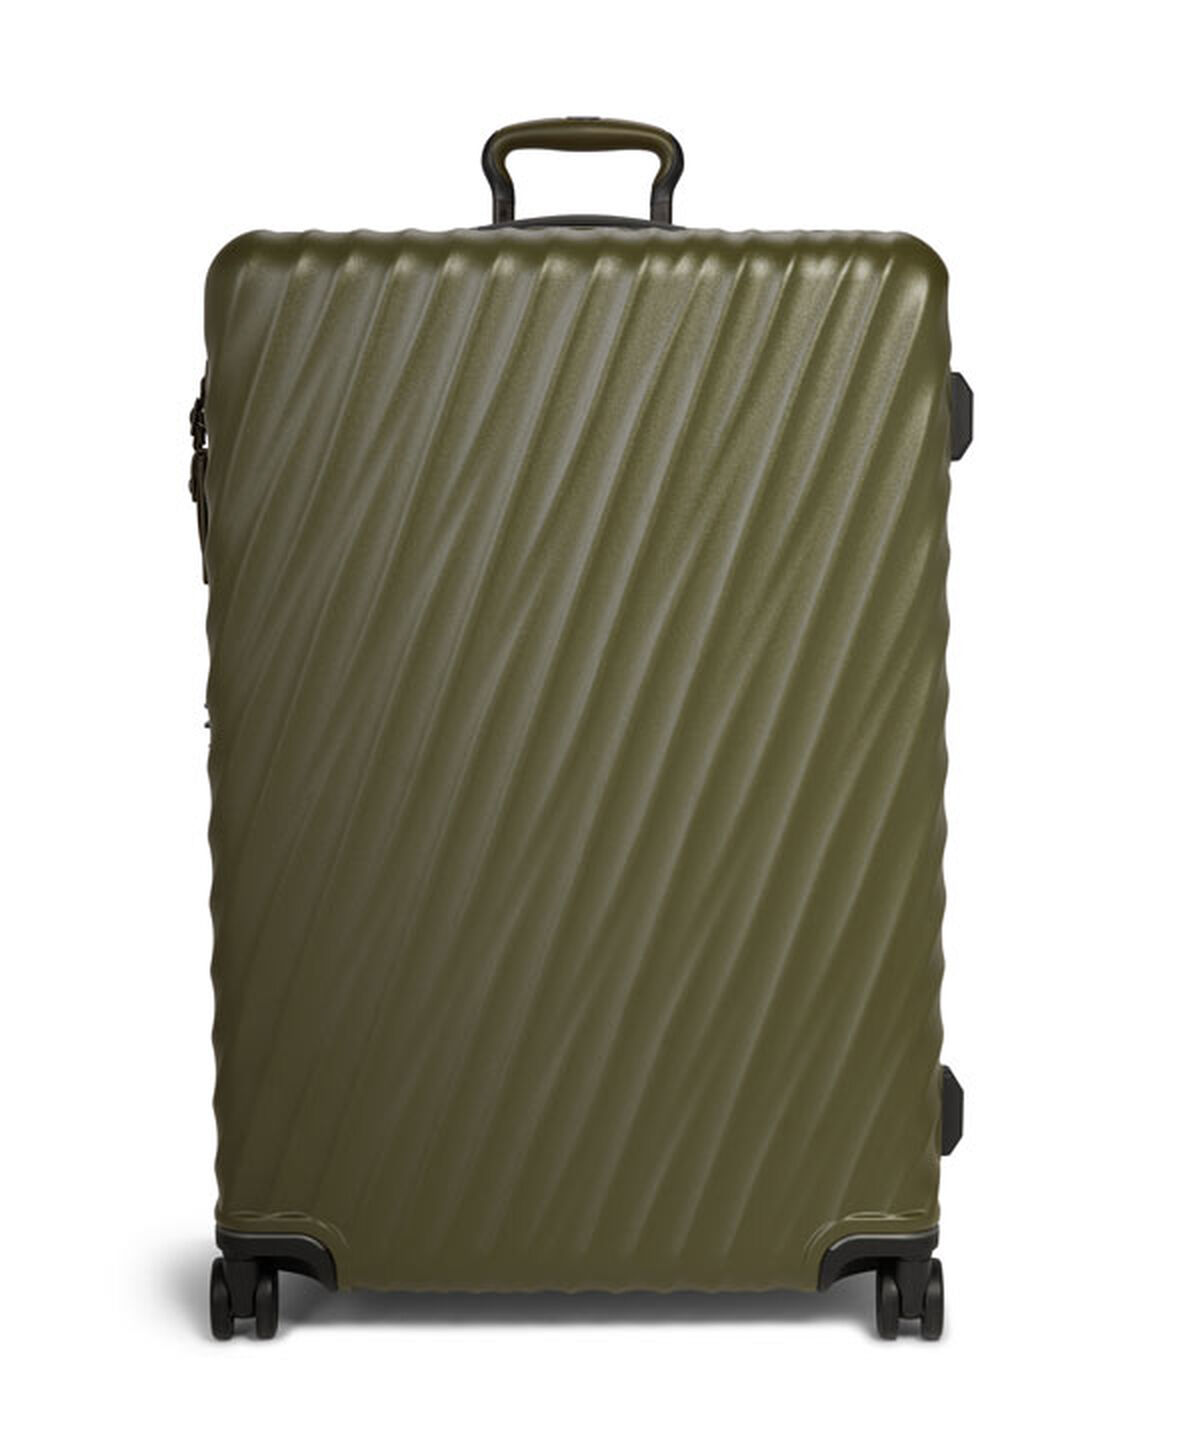 TUMI 19 Degree Extended Trip Expandable Checked Luggage Olive Texture